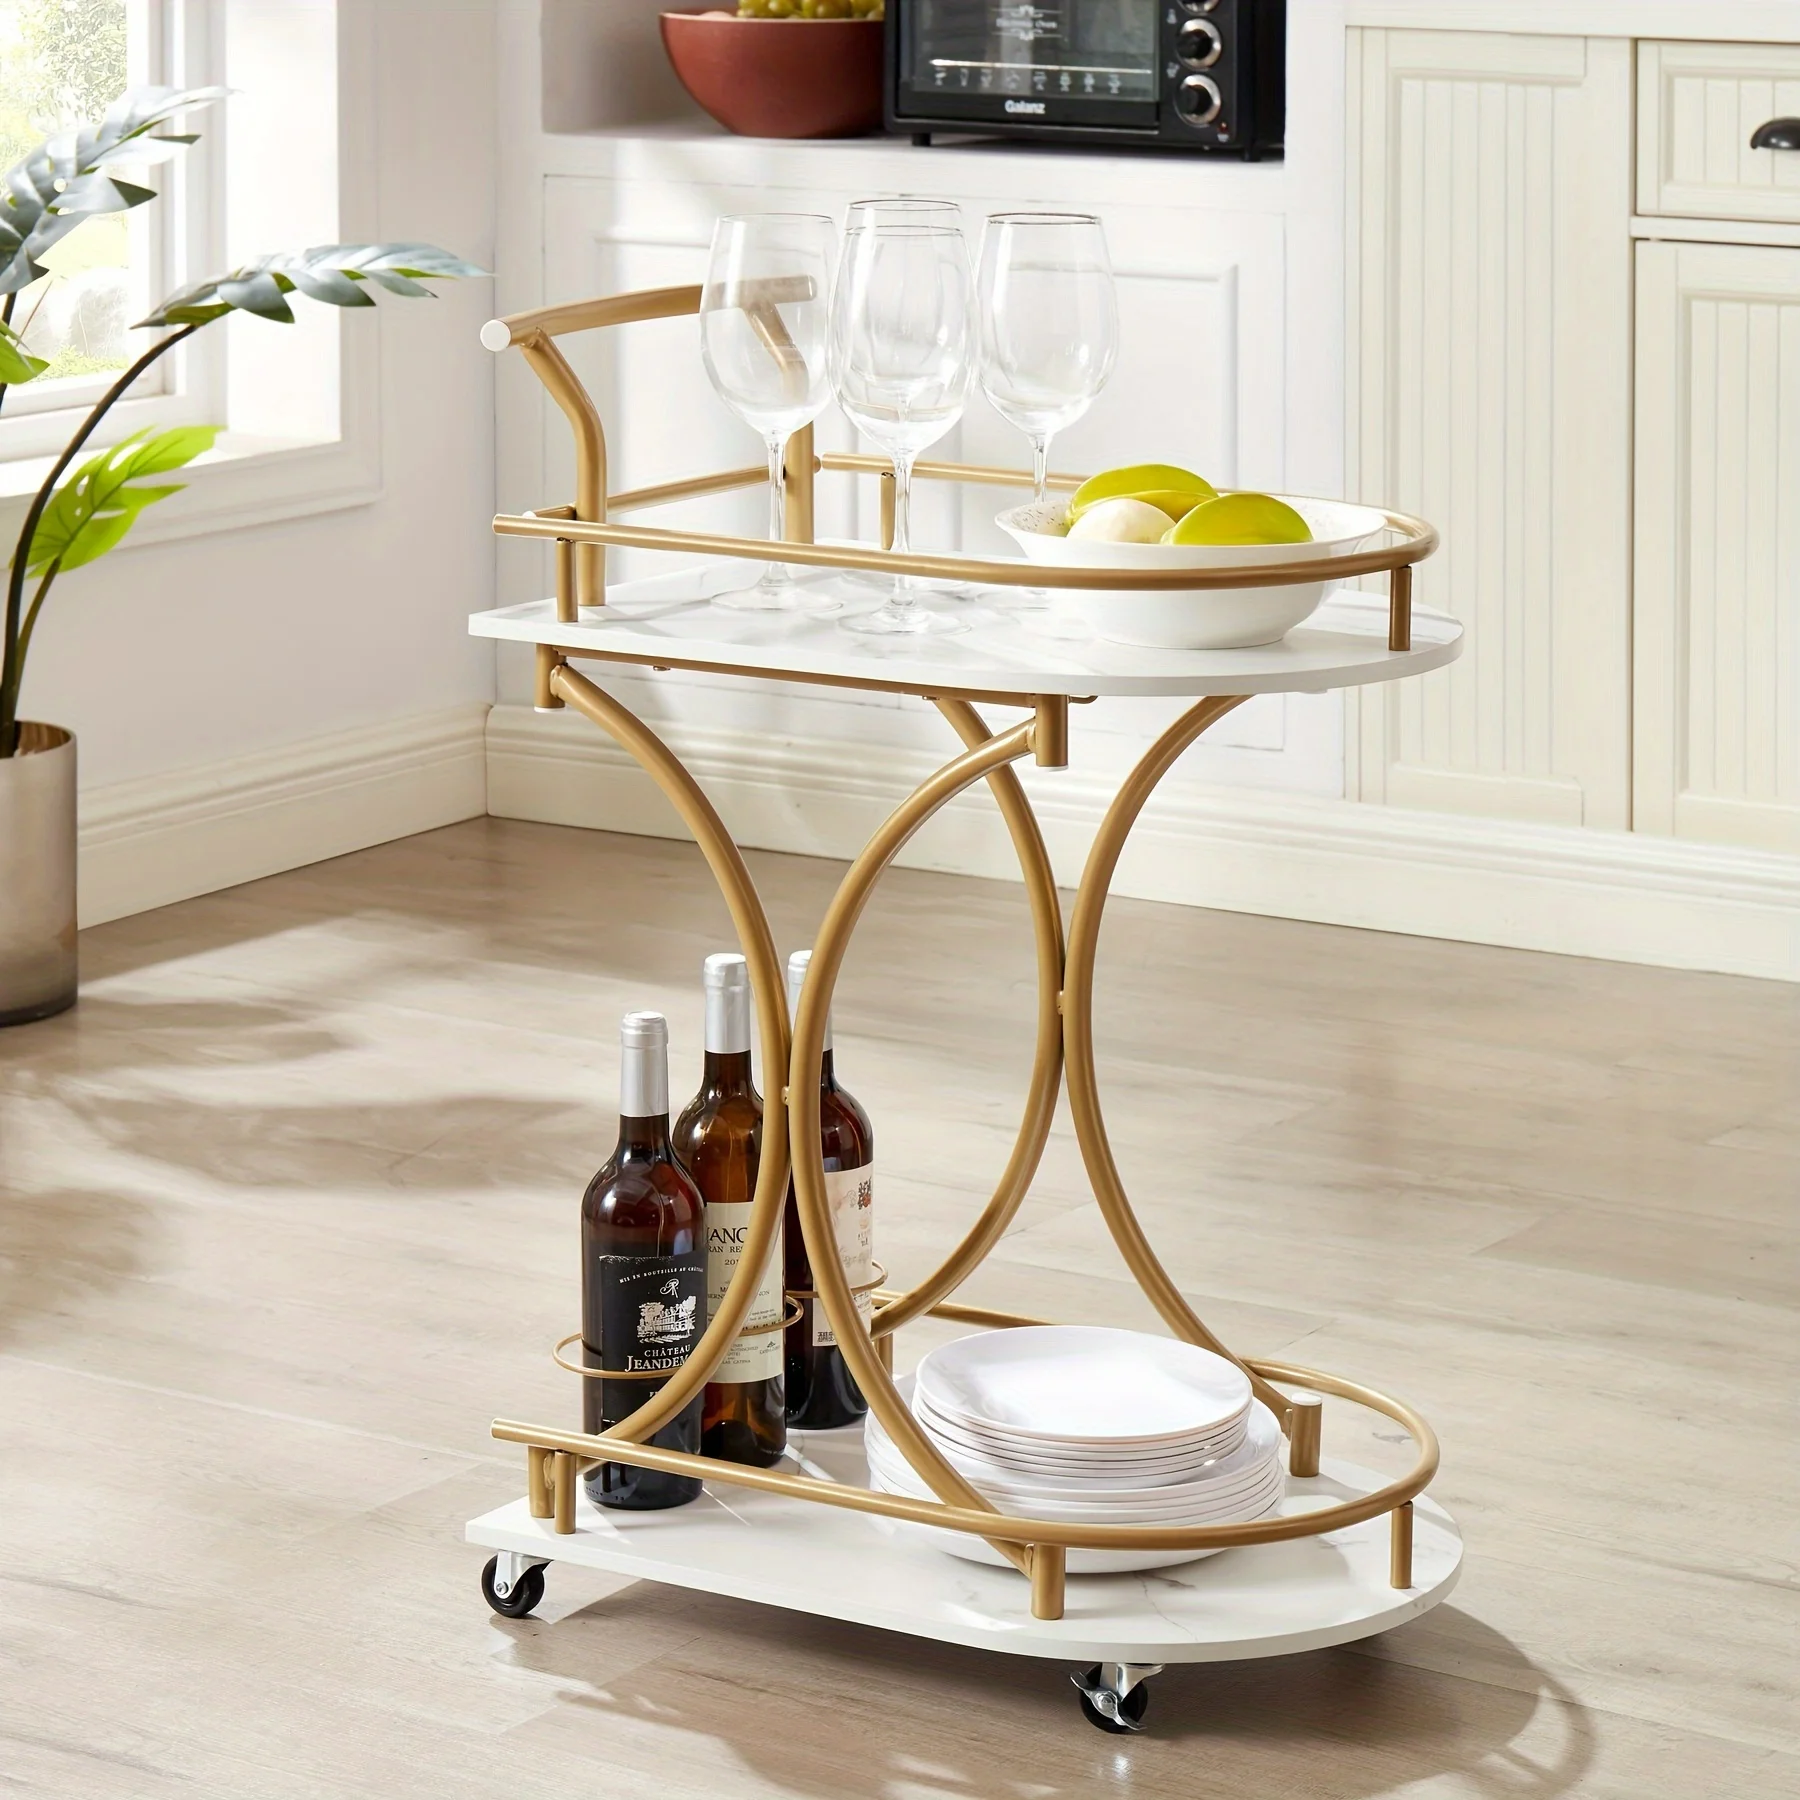 

2-Tier Bar Cart, Mobile Bar Serving Cart, Industrial Style Wine Cart for Kitchen, Beverage Cart with Wine Rack and Glass Holder,